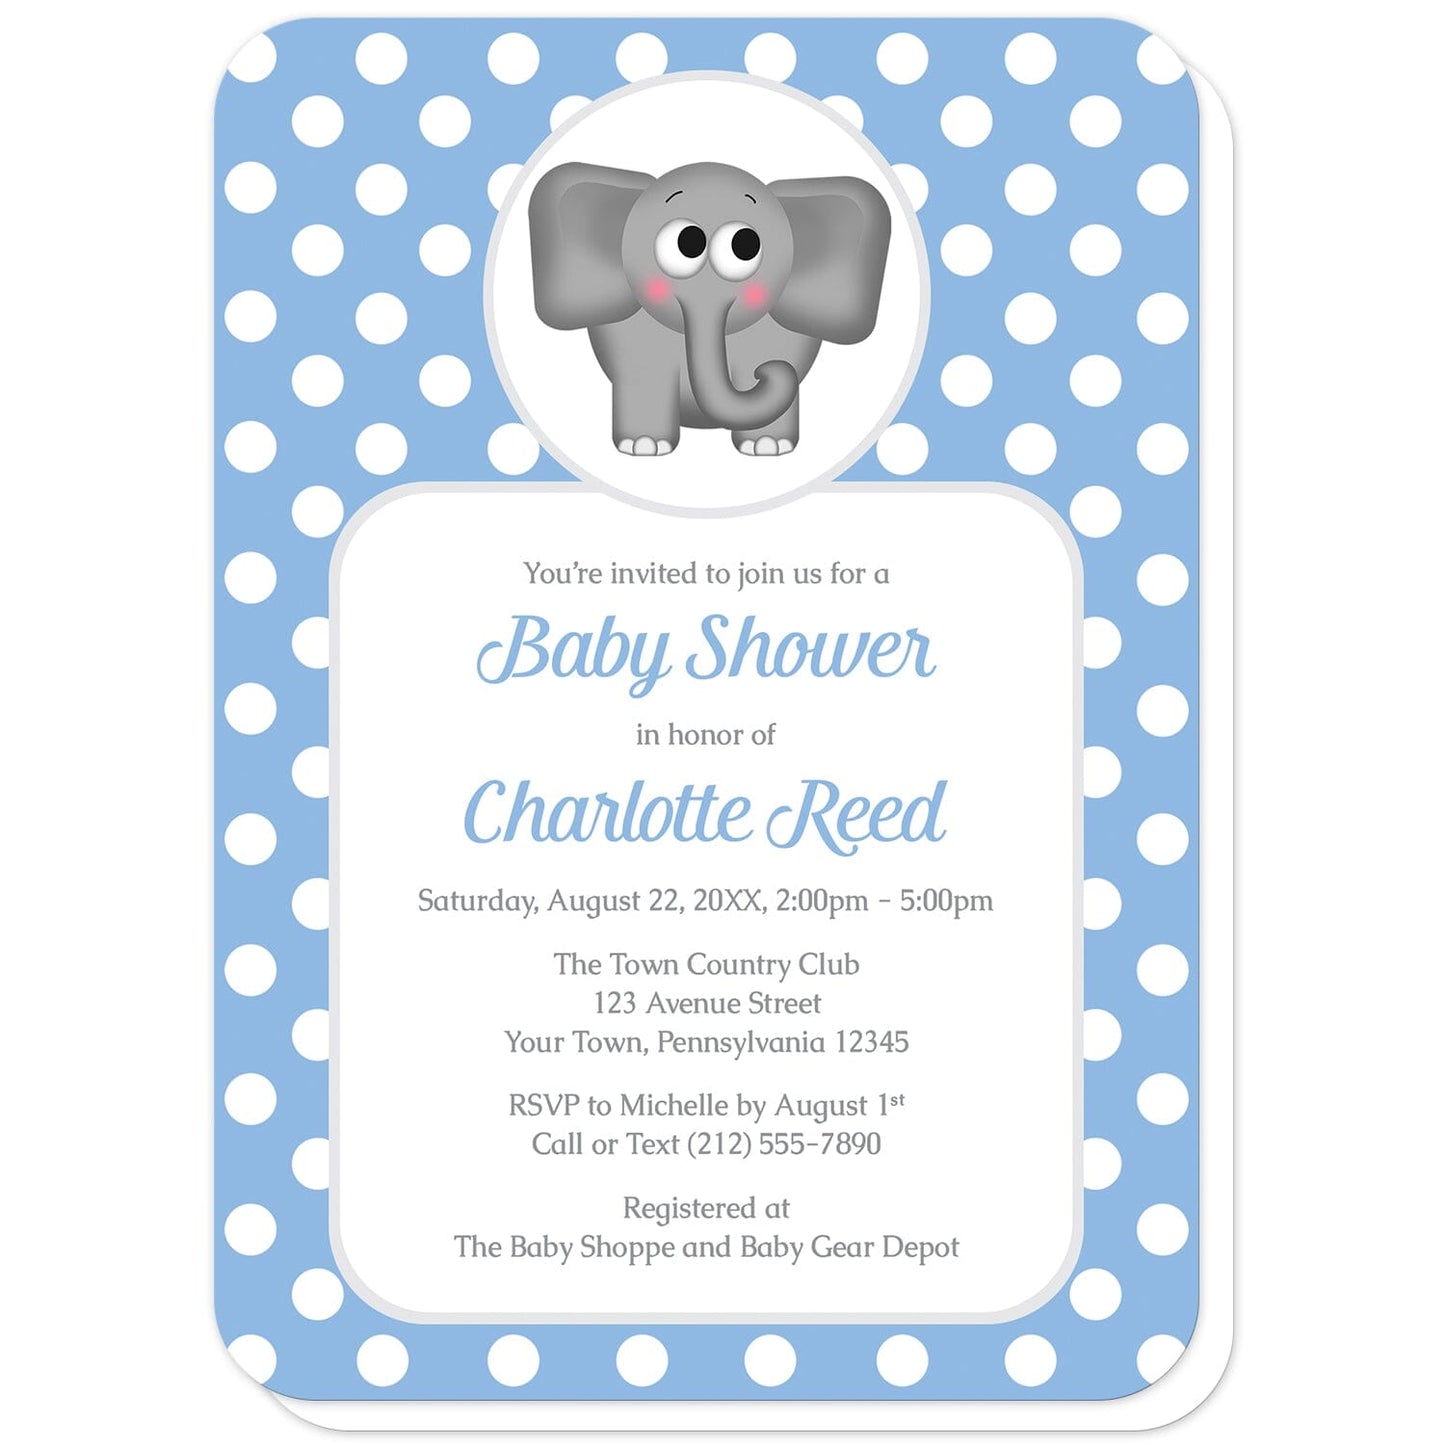 Cute Elephant Blue Polka Dot Baby Shower Invitations (with rounded corners) at Artistically Invited. Cute elephant blue polka dot baby shower invitations that are illustrated with an affectionate and adorable gray elephant over a blue polka dot background. Your personalized baby shower details are custom printed in blue and gray over a white rectangular area over the blue polka dot background.